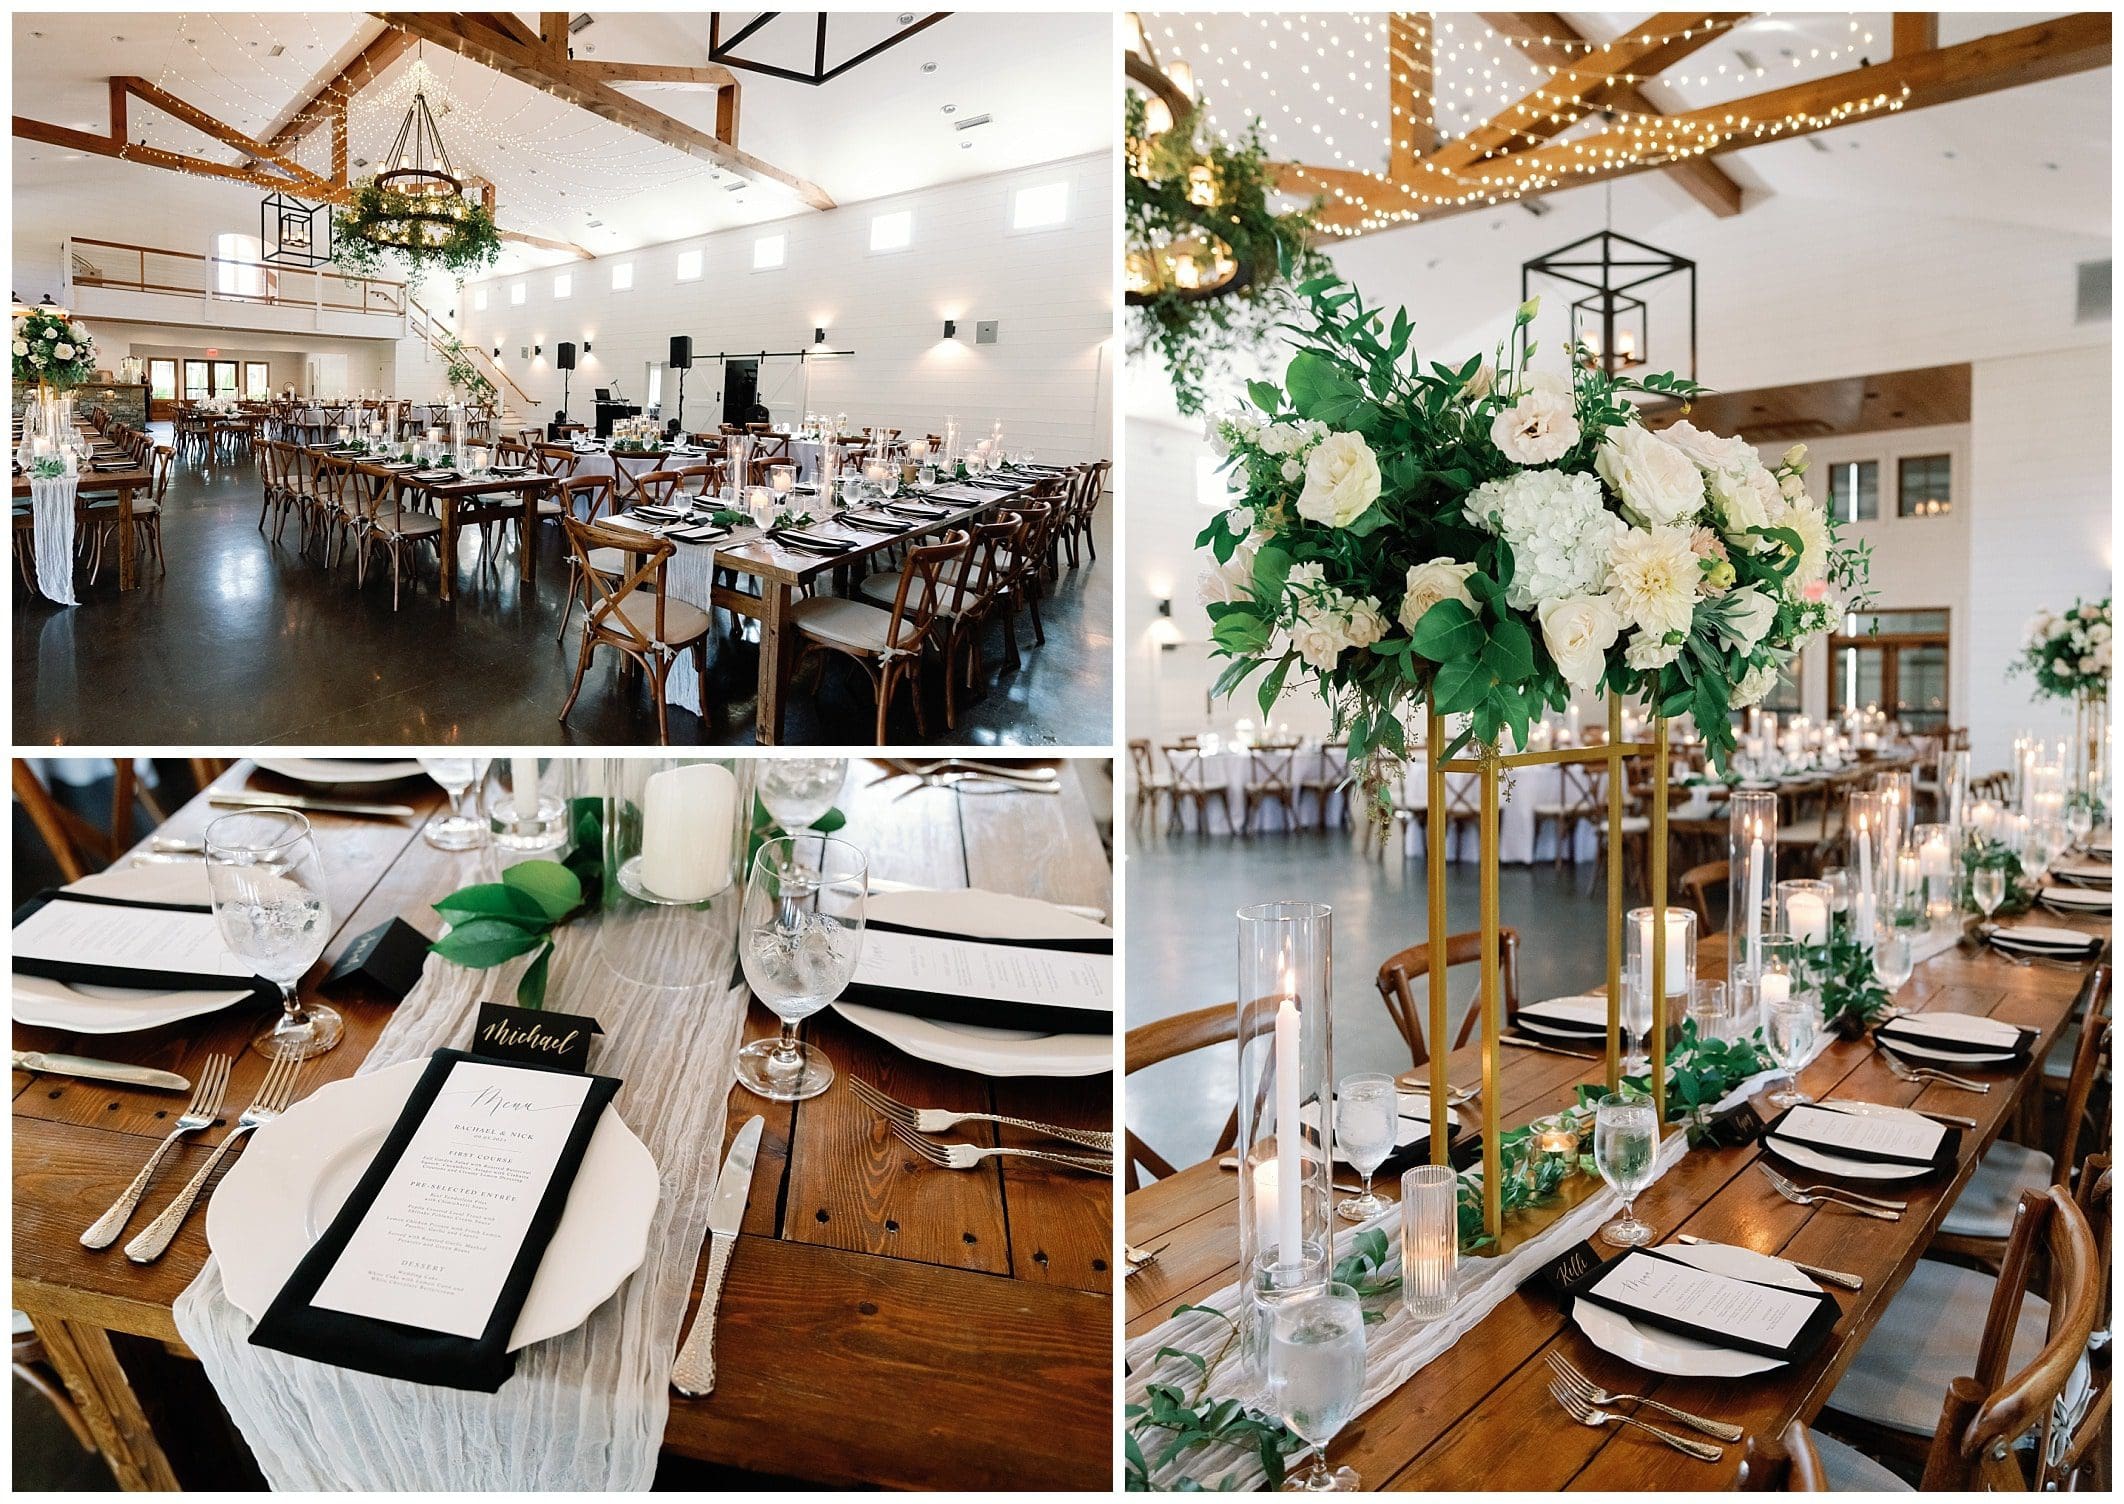 A wedding reception set up with white and green centerpieces.